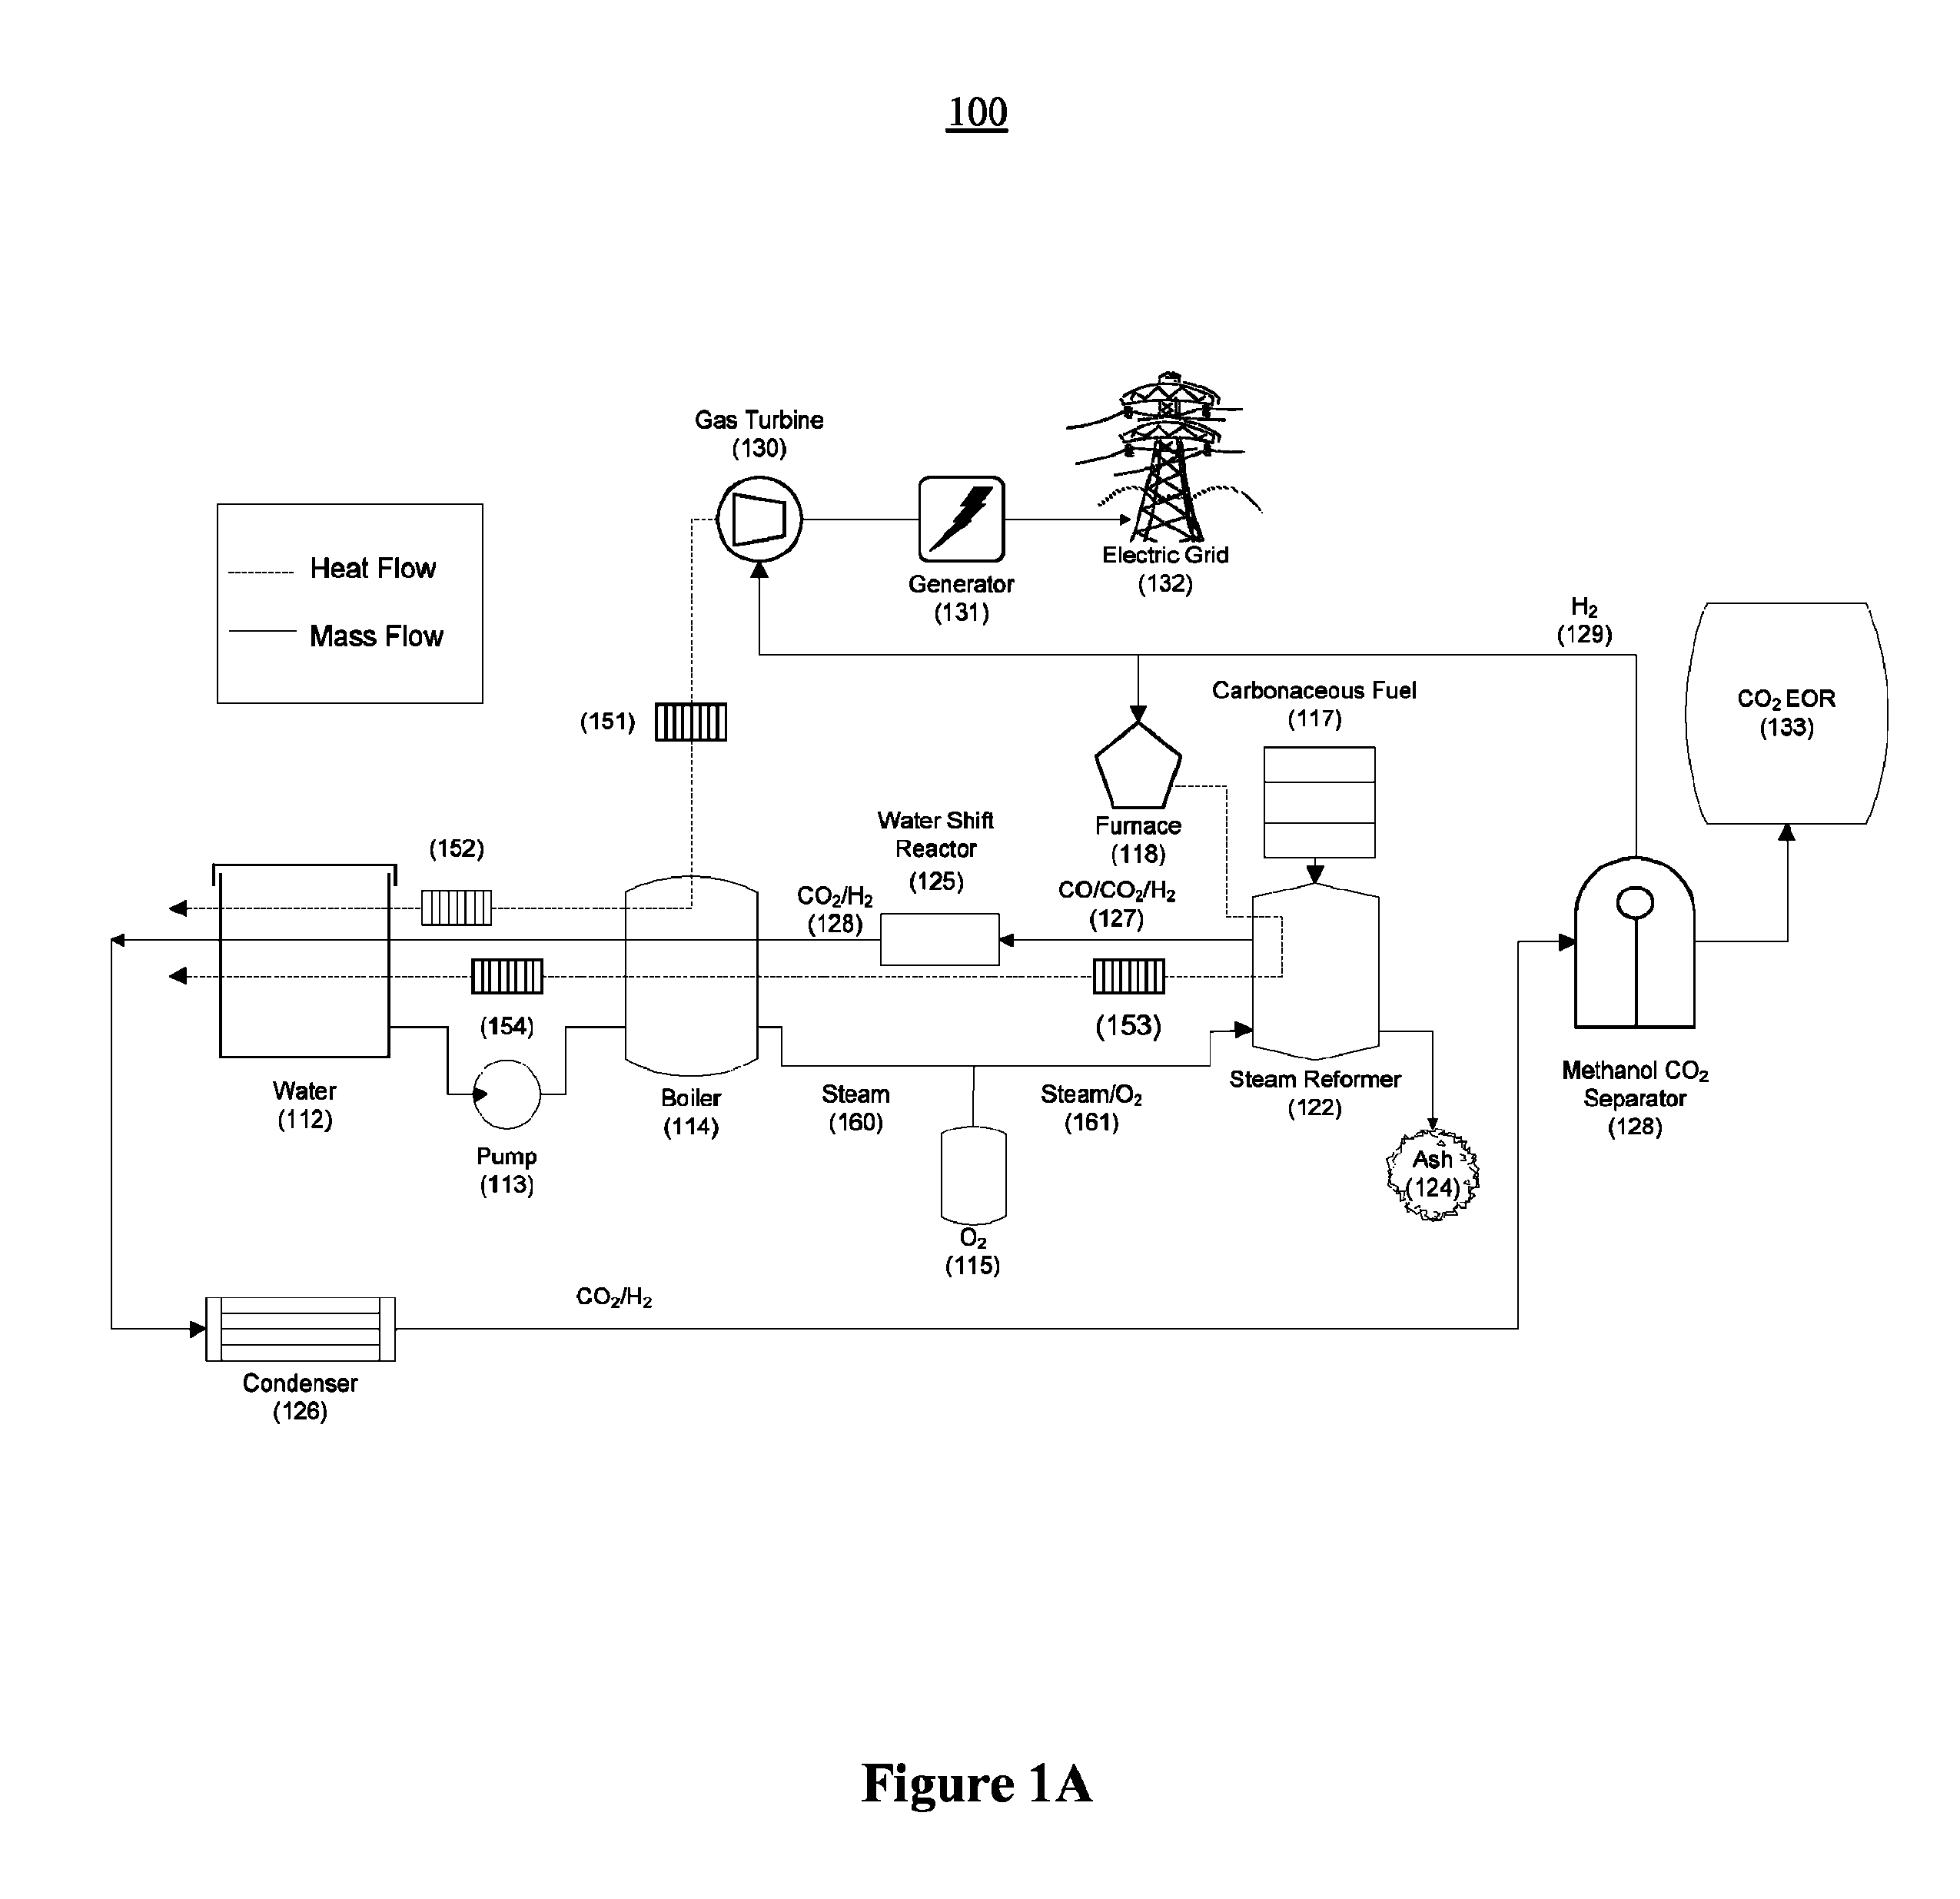 Systems and methods for generating in-situ carbon dioxide driver gas for use in enhanced oil recovery